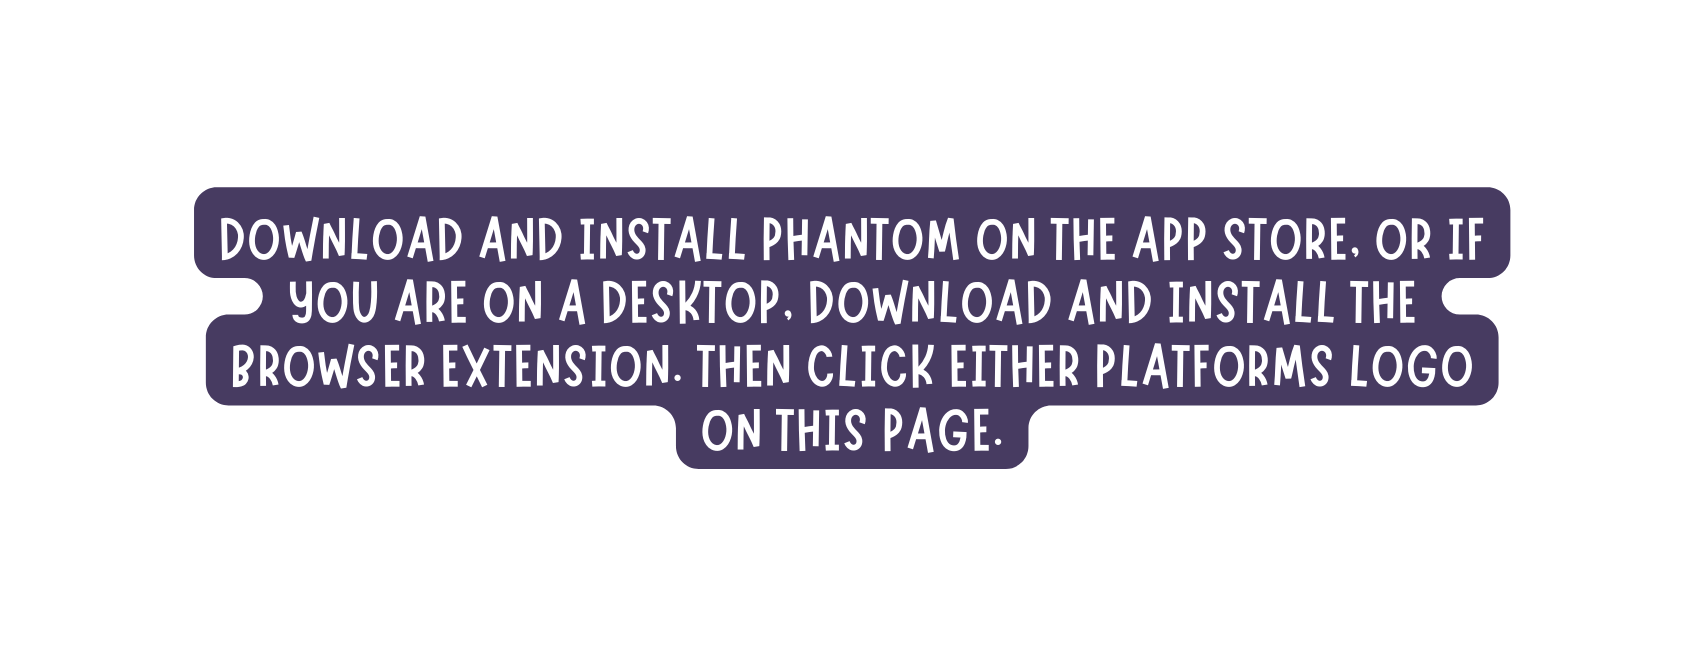 DOWNLOAD AND INSTALL PHANTOM ON THE APP STORE OR IF YOU ARE ON A DESKTOP DOWNLOAD AND INSTALL THE BROWSER EXTENSION Then click either Platforms logo on this page